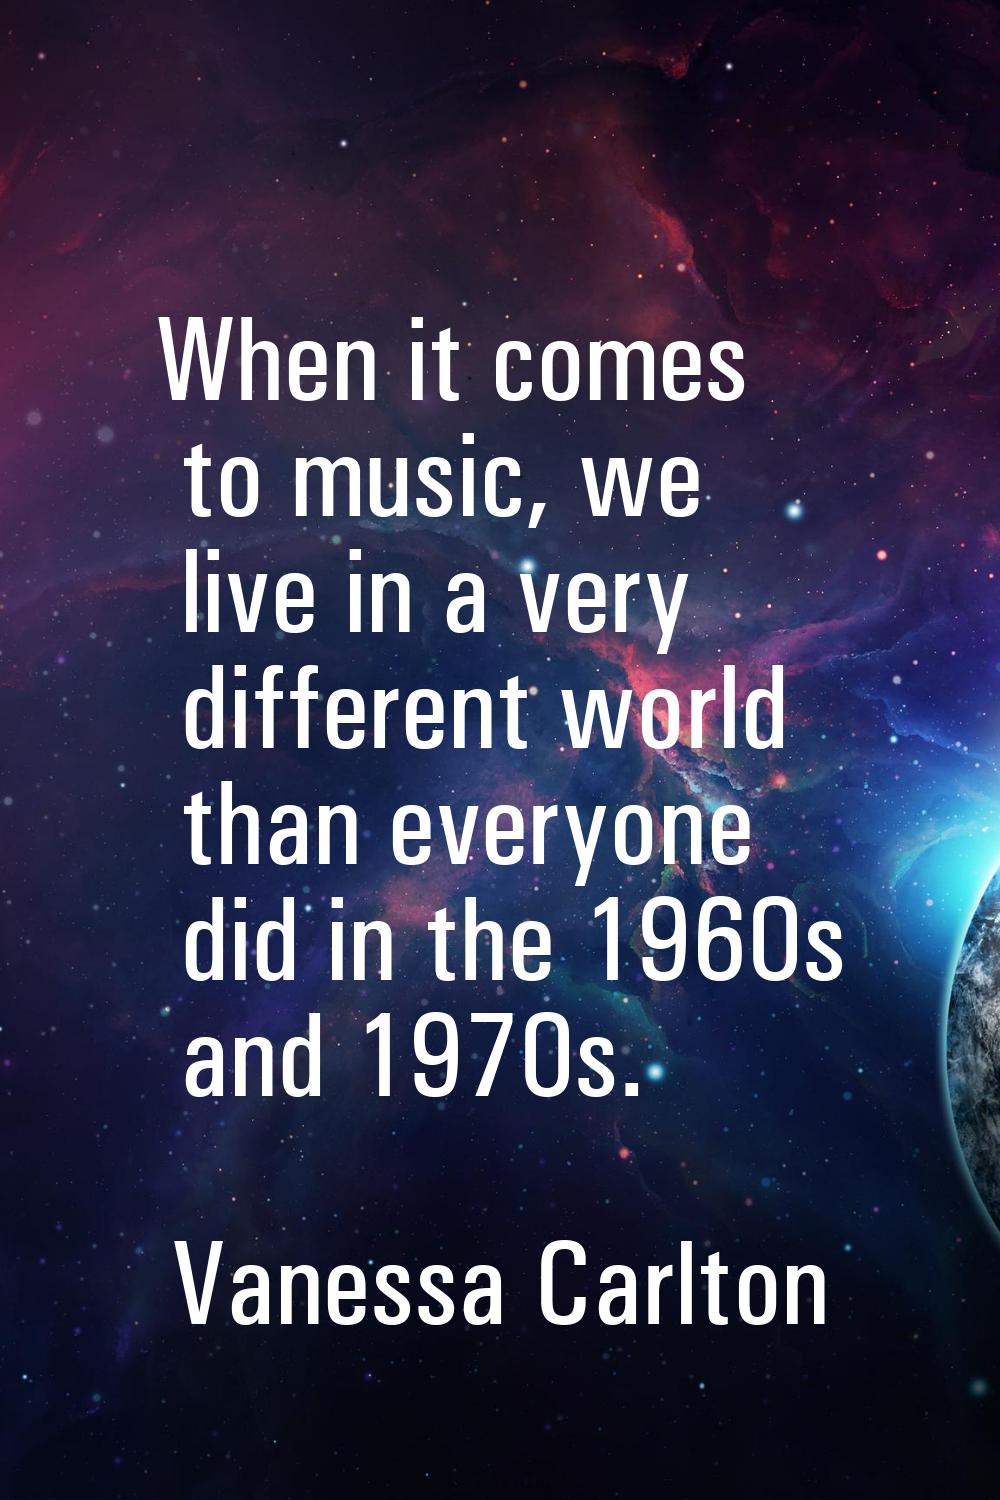 When it comes to music, we live in a very different world than everyone did in the 1960s and 1970s.